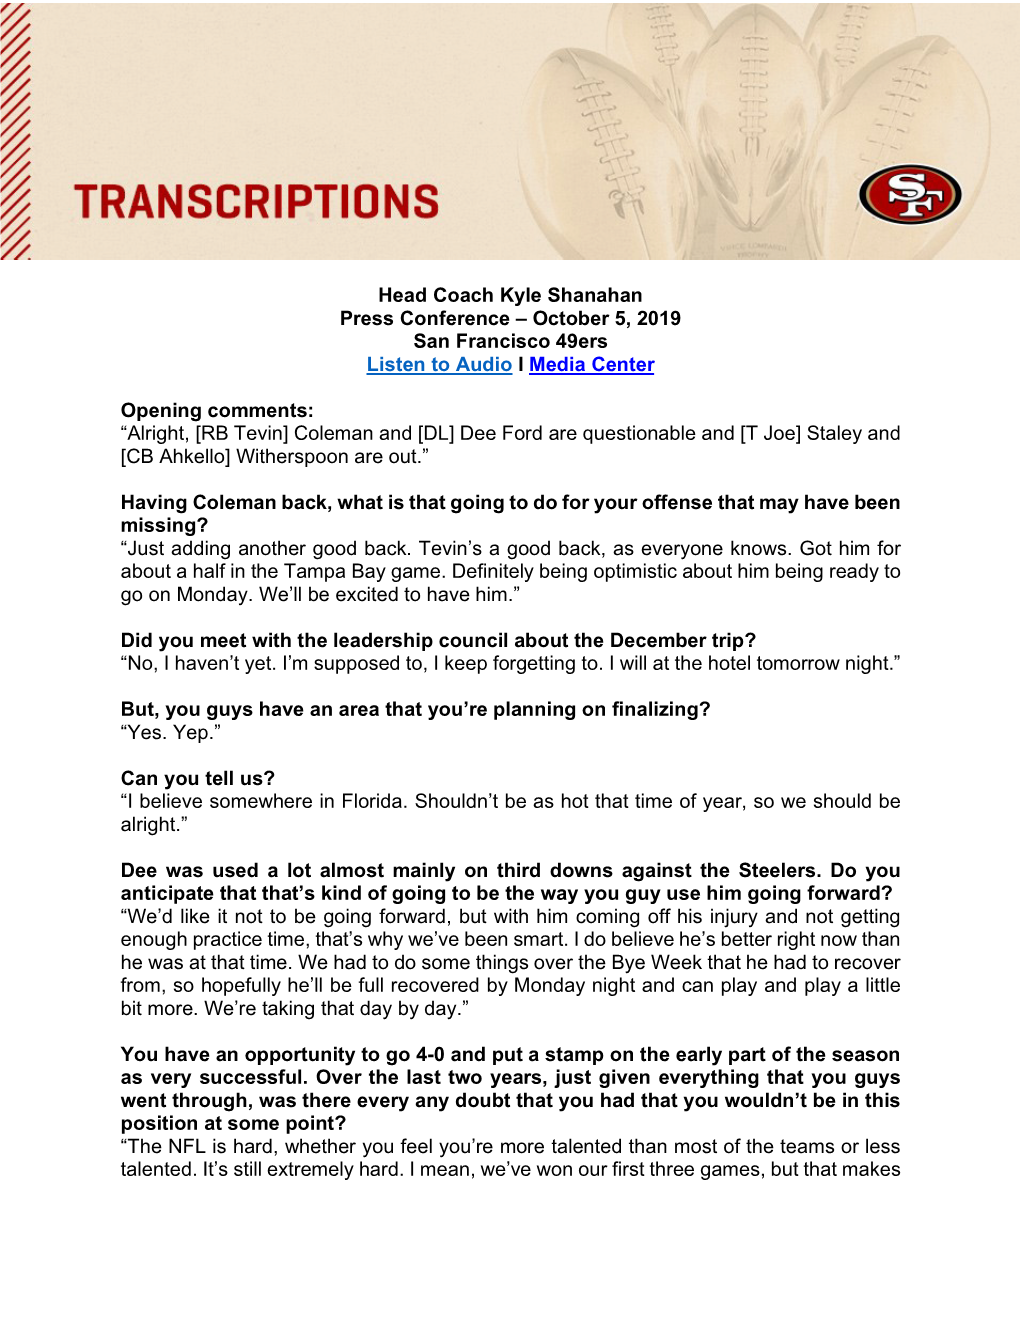 Head Coach Kyle Shanahan Press Conference – October 5, 2019 San Francisco 49Ers Listen to Audio I Media Center Opening Comment